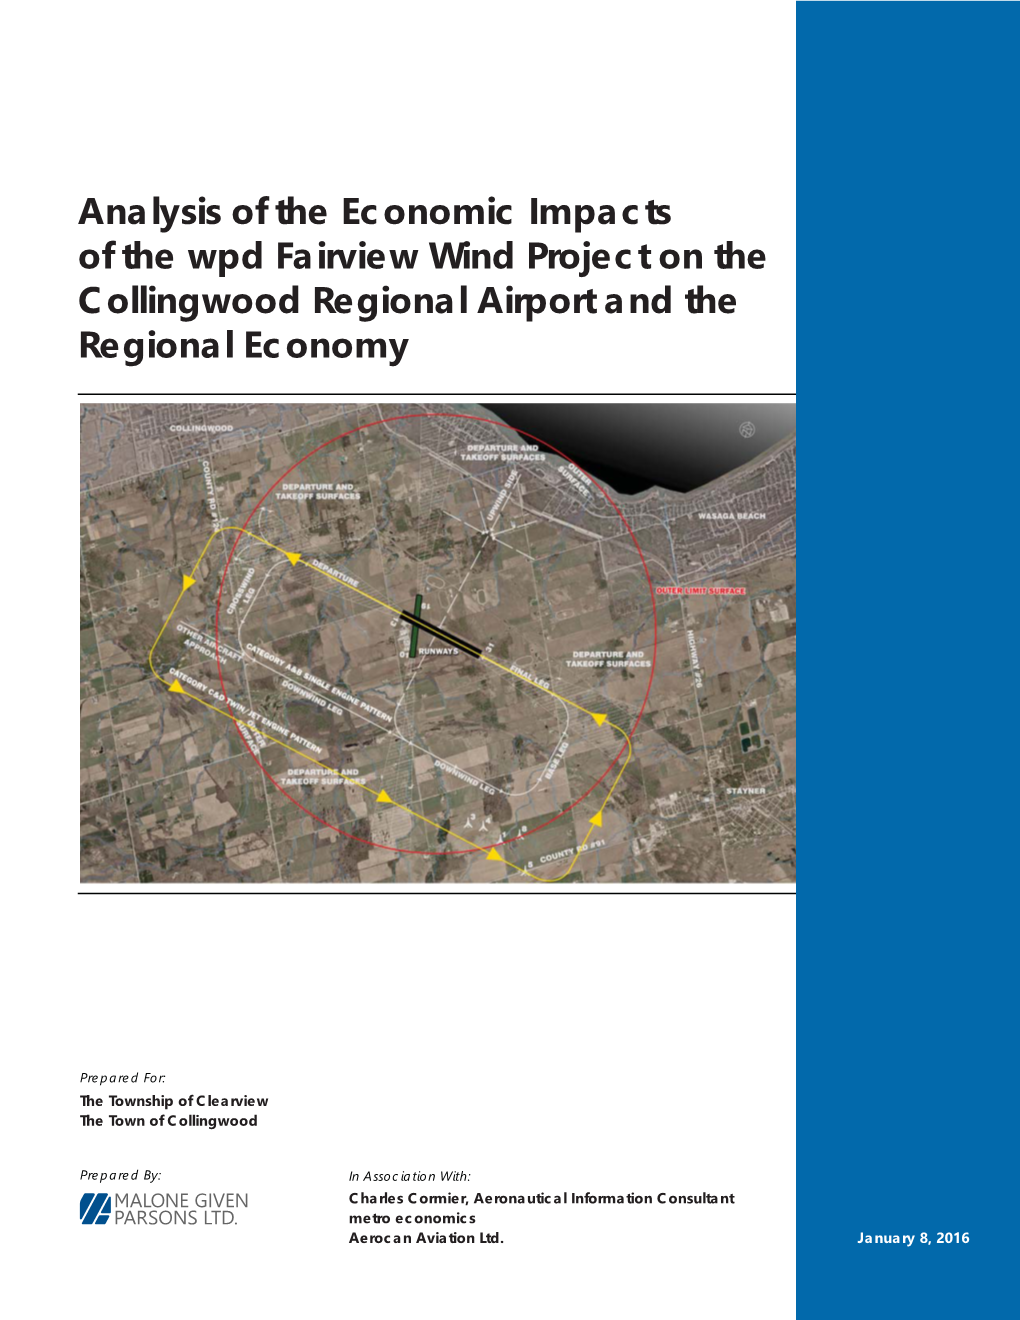 Analysis of the Economic Impacts of the Wpd Fairview Wind Project on the Collingwood Regional Airport and the Regional Economy